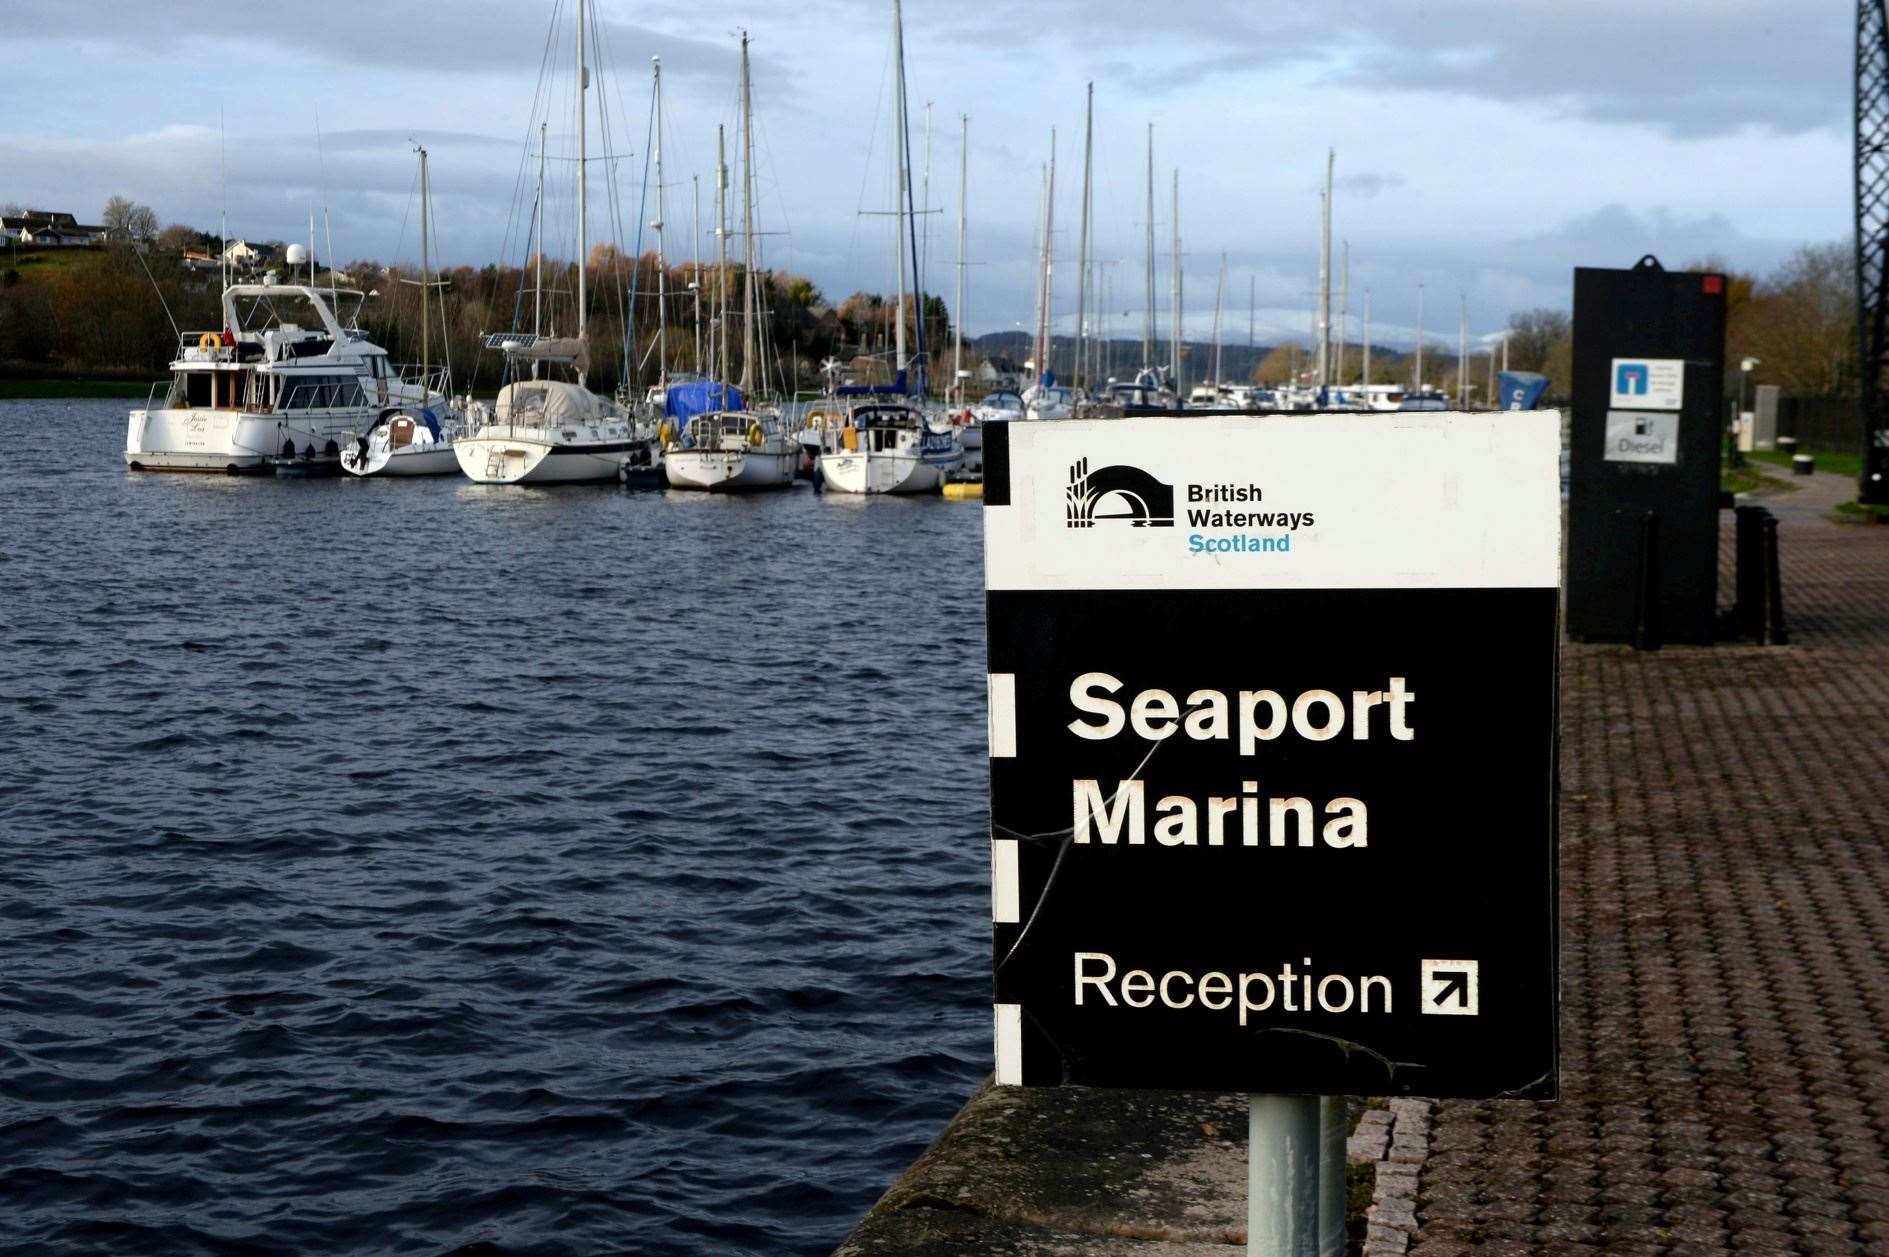 The terrifying attack on the two teenagers took place at the Seaport Marina on the Caledonian Canal.